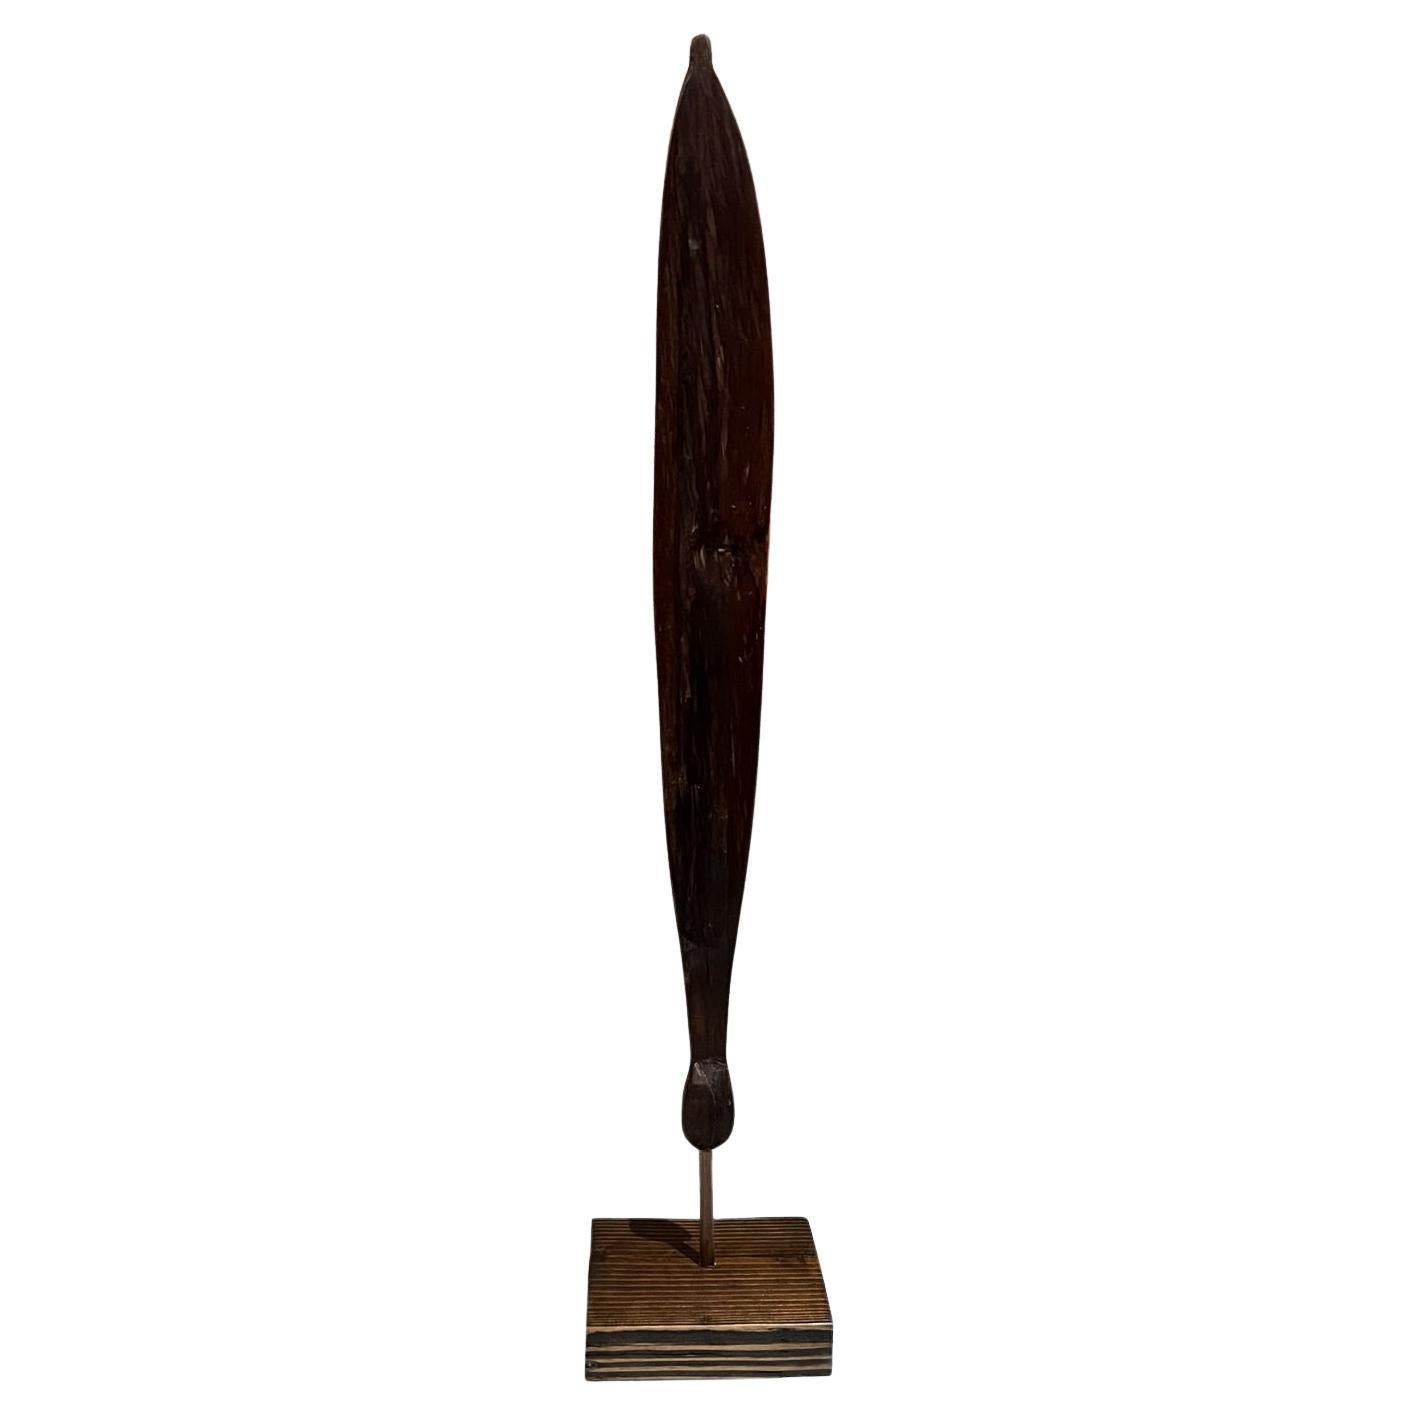  Mexican Exotic Ironwood Carved Modern Sculpture Palo Fiero Wood For Sale